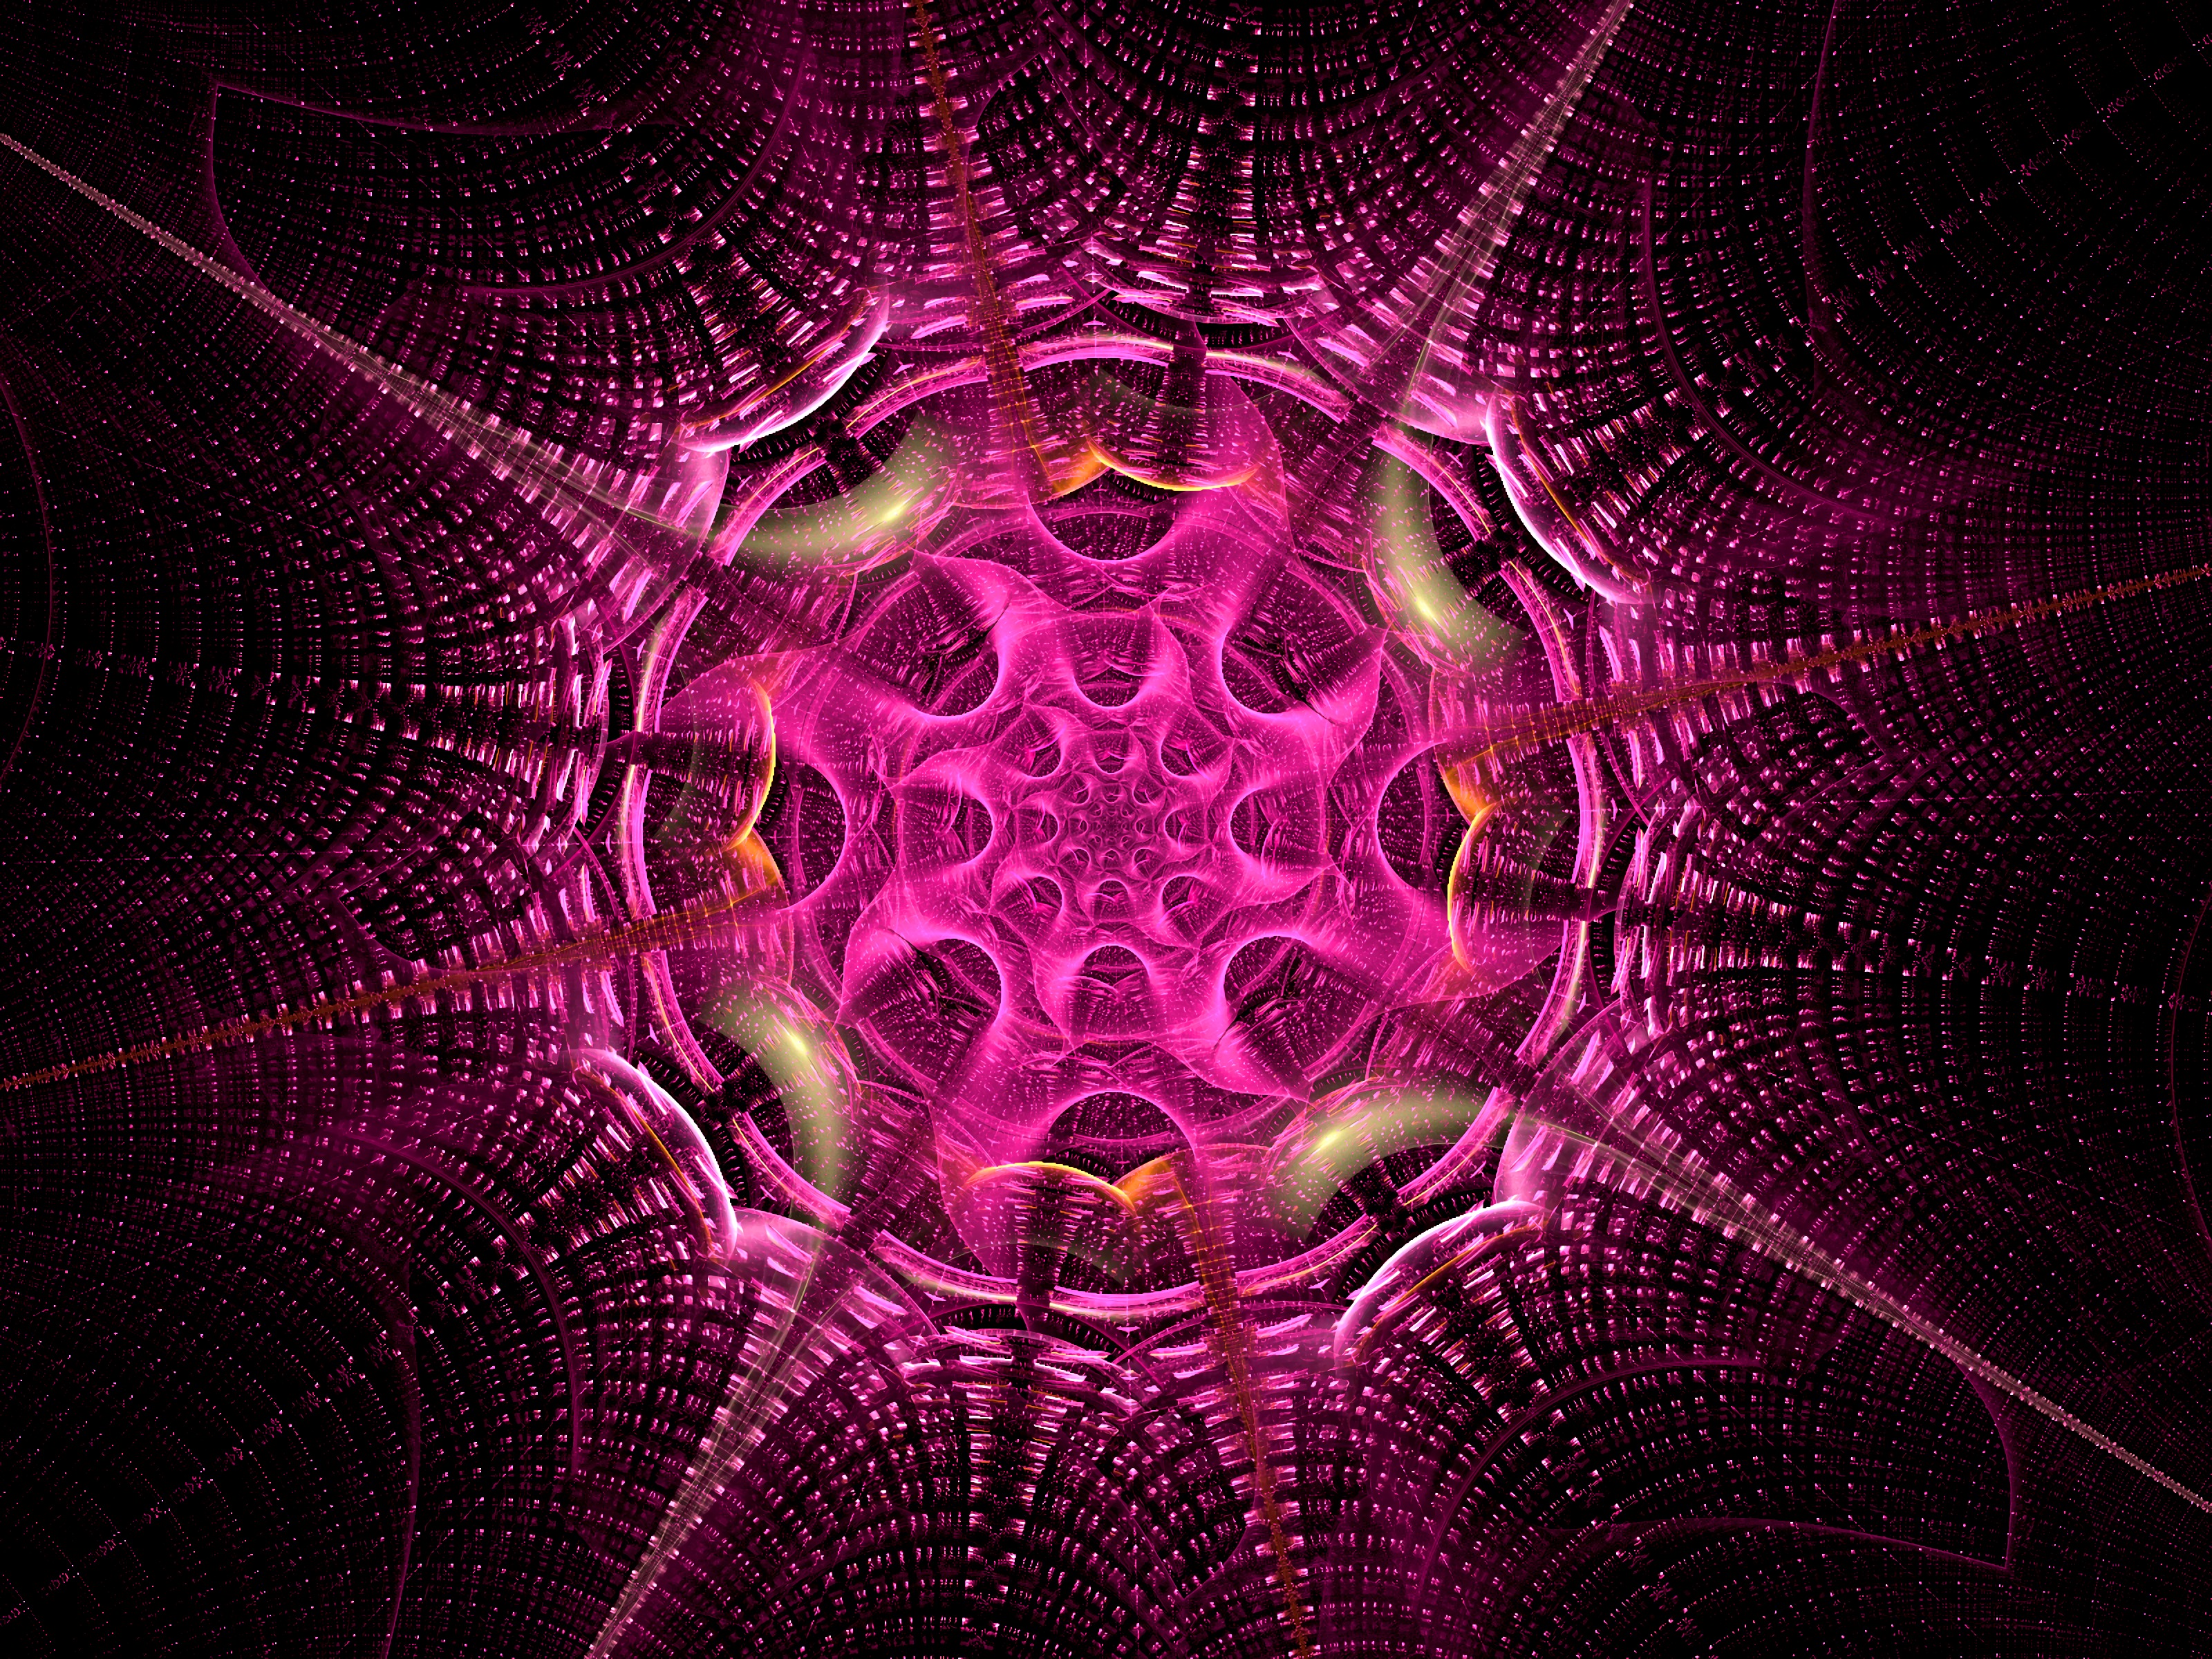 1920x1080 Background purple, abstract, violet, pattern, fractal, confused, intricate, swirling, involute